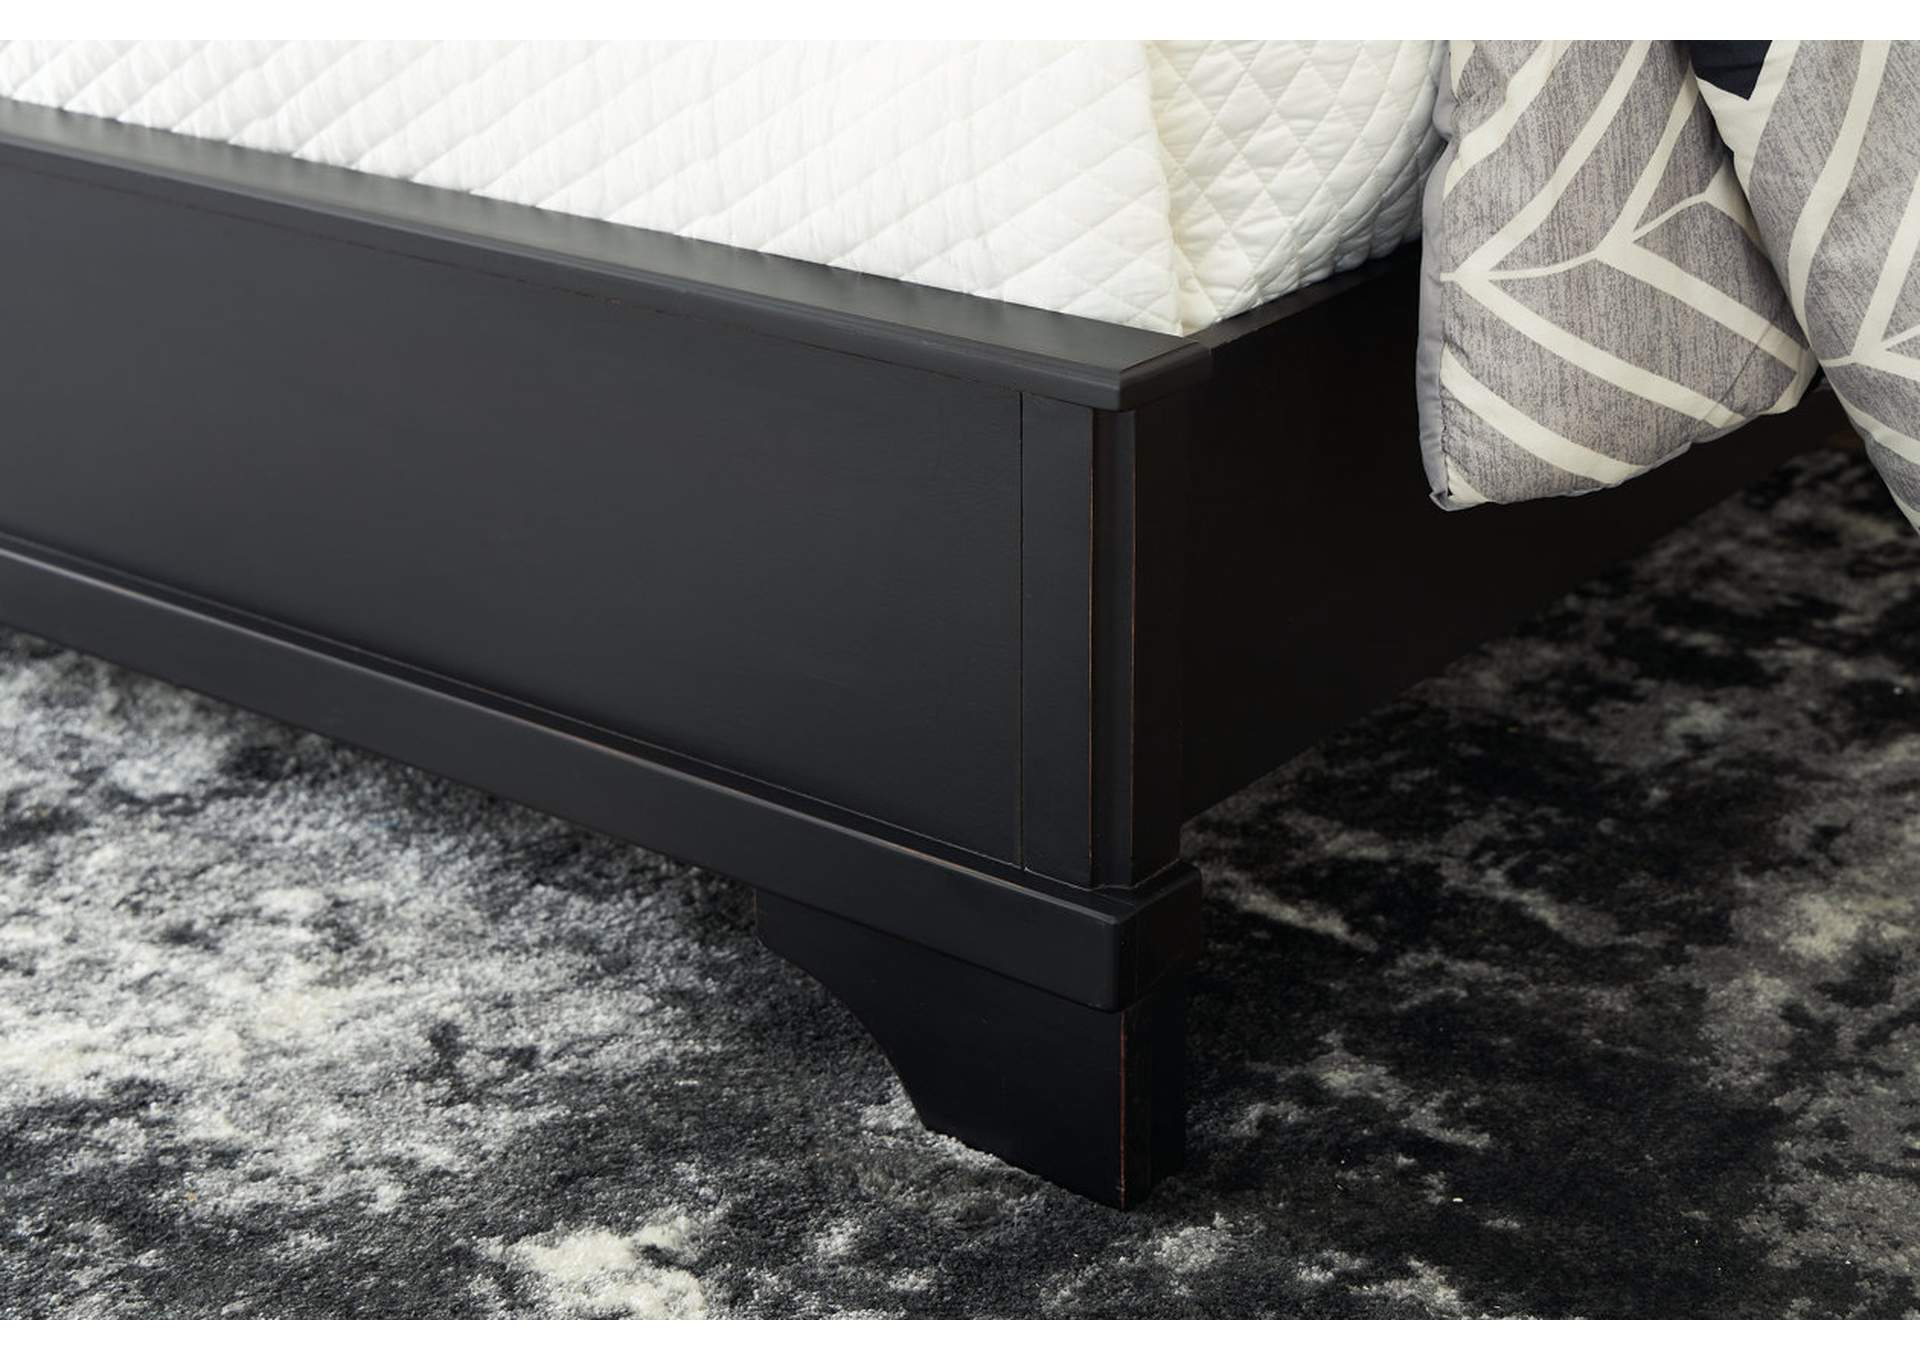 Chylanta Queen Sleigh Bed,Signature Design By Ashley